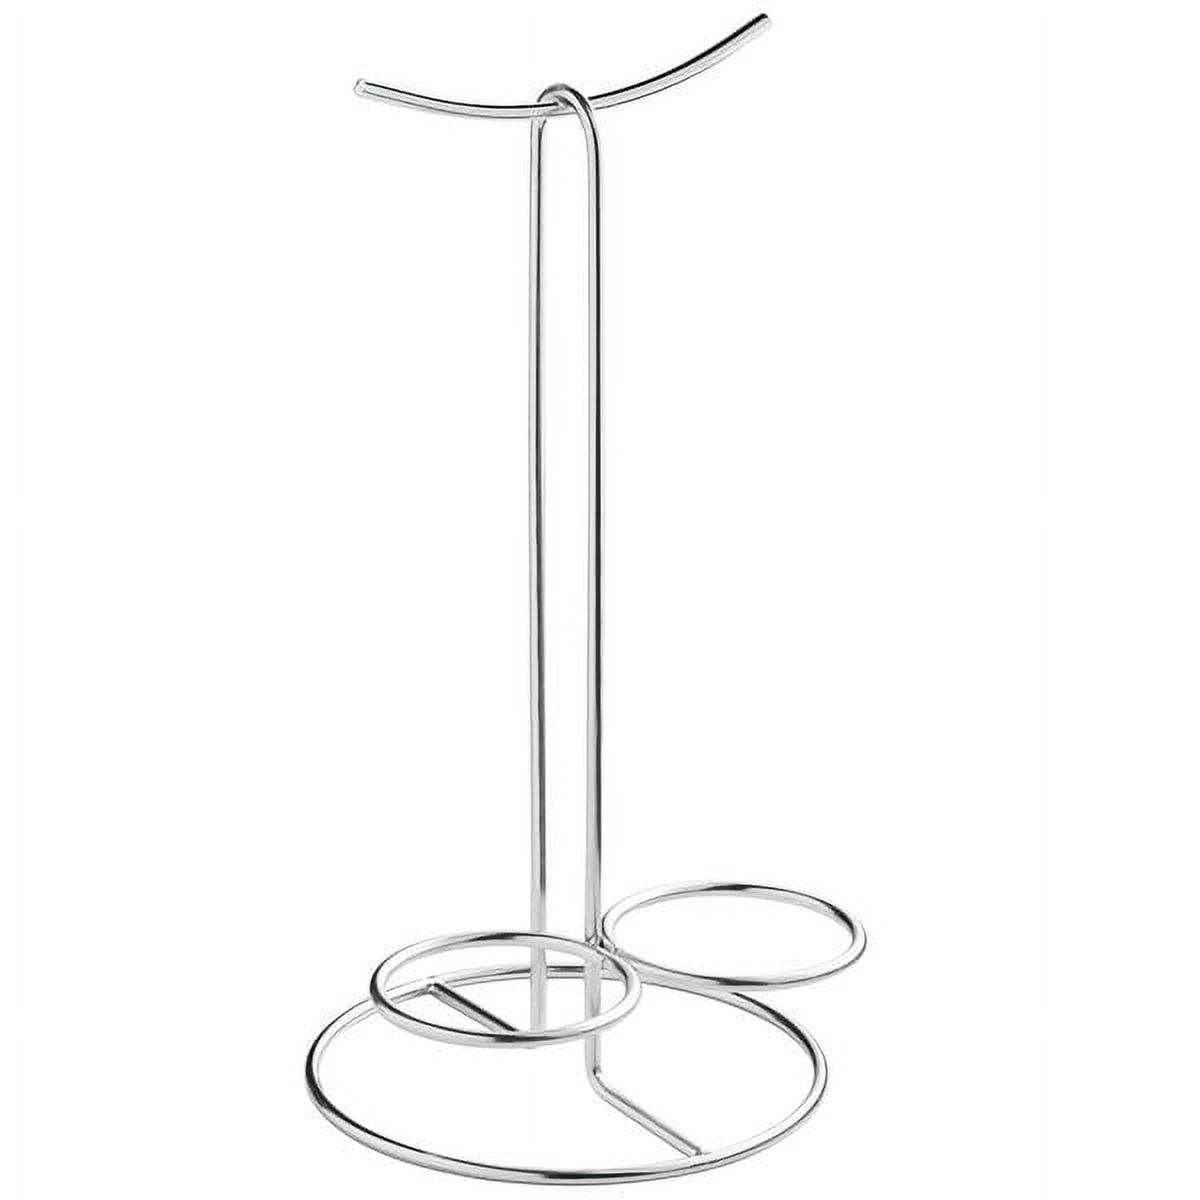 Tablecraft 10461 Stainless Steel Onion Ring / Pretzel Serving Tower with Ramekin Holders - image 1 of 1